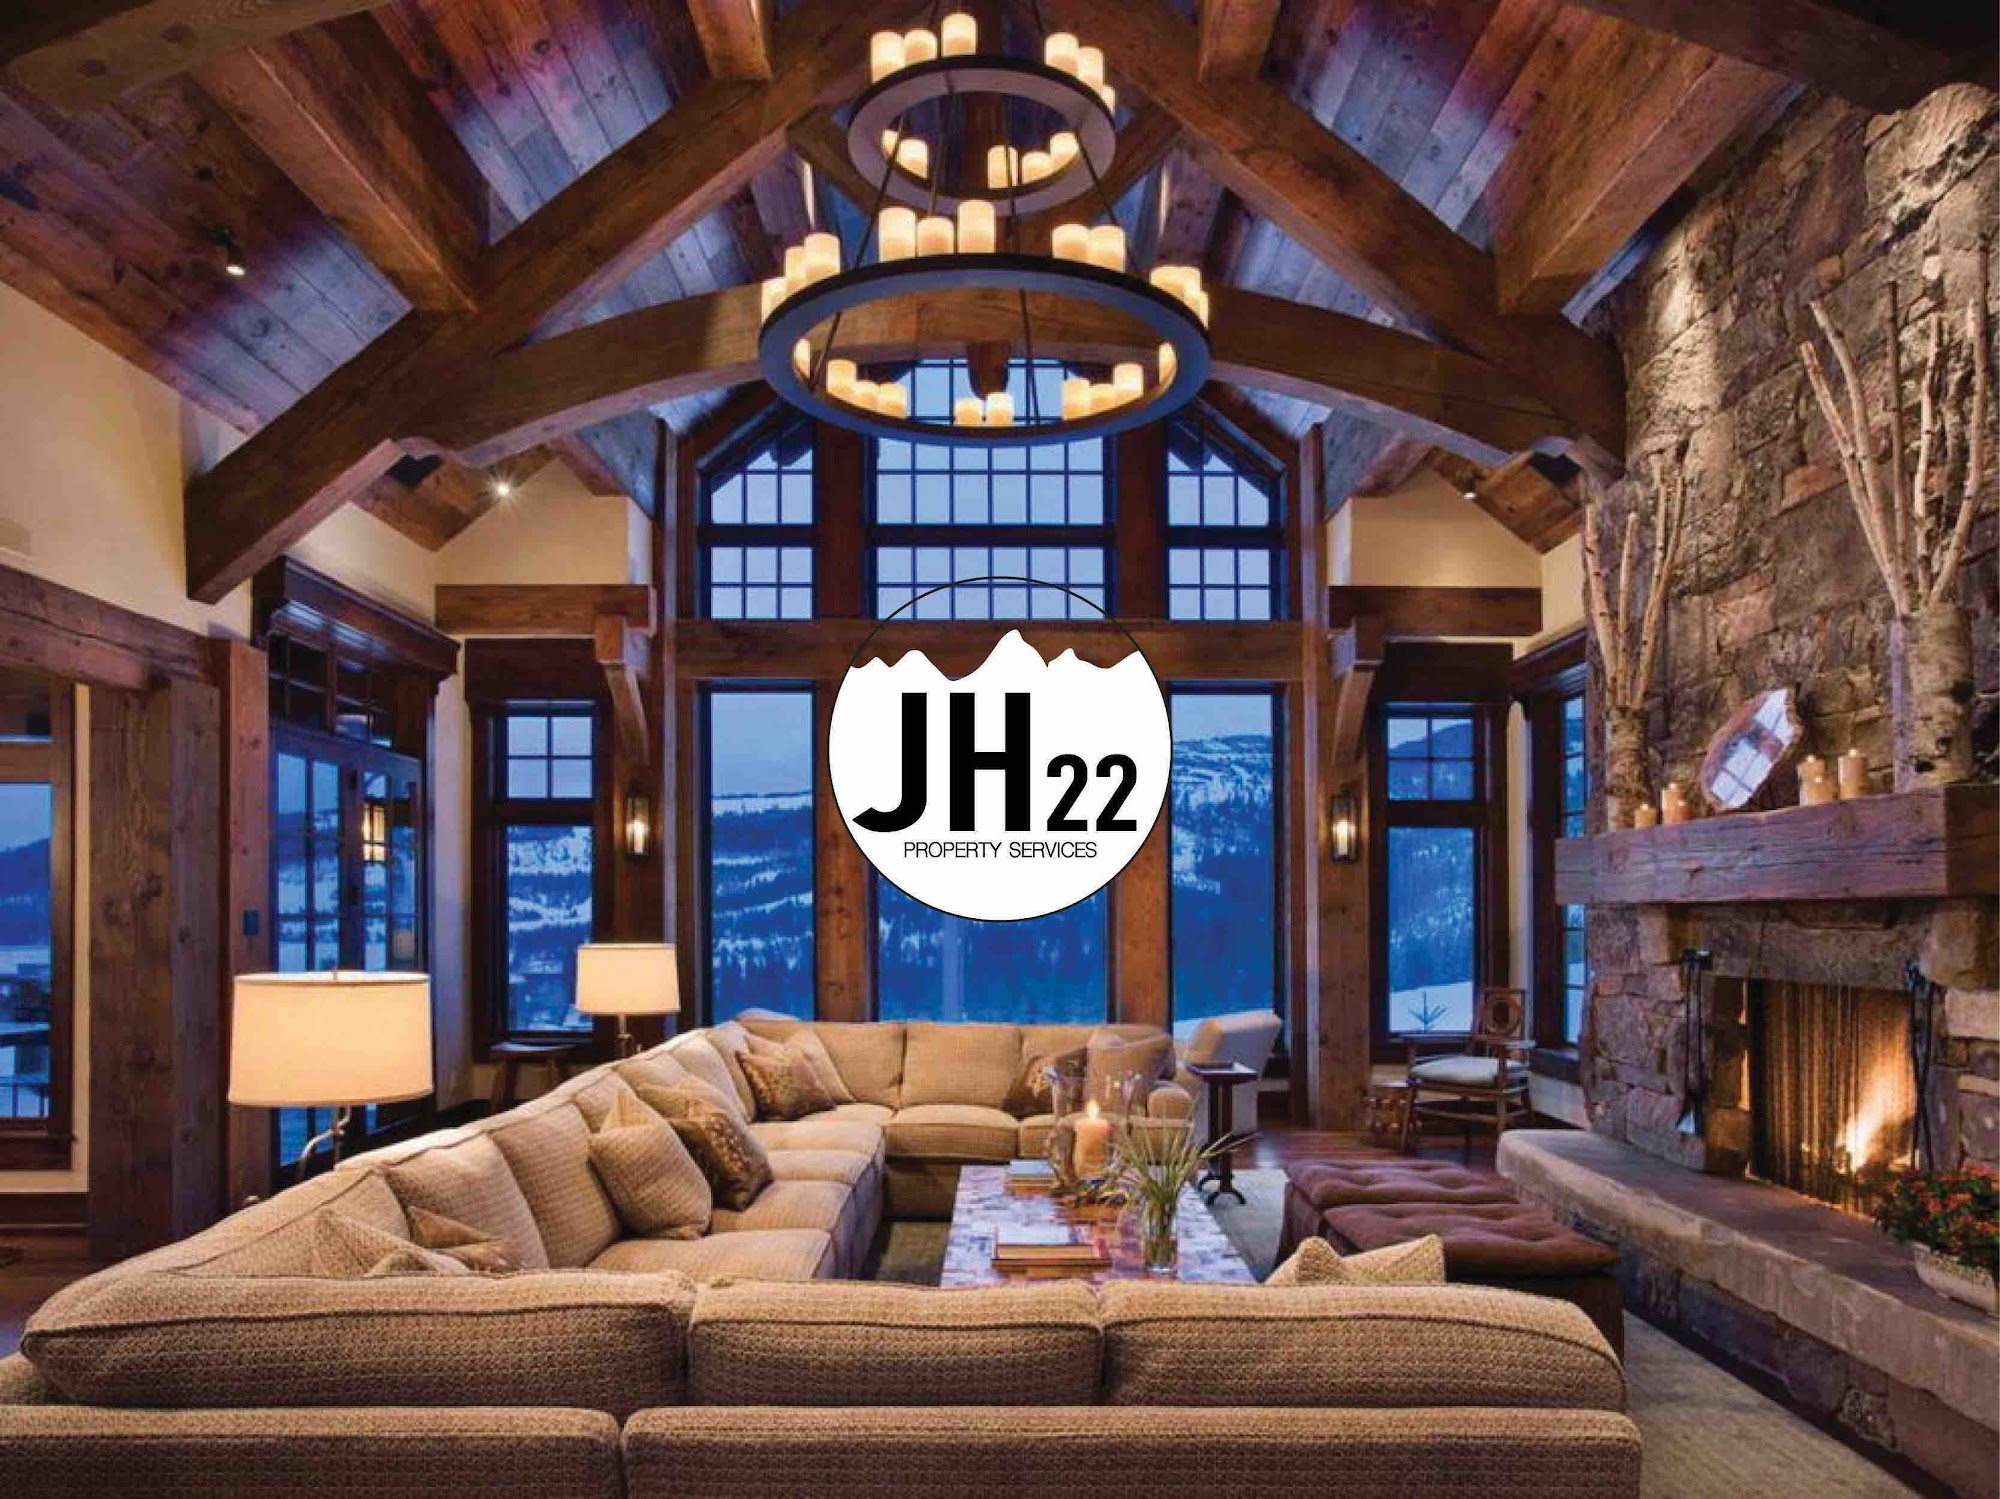 JH22 Cleaning Services